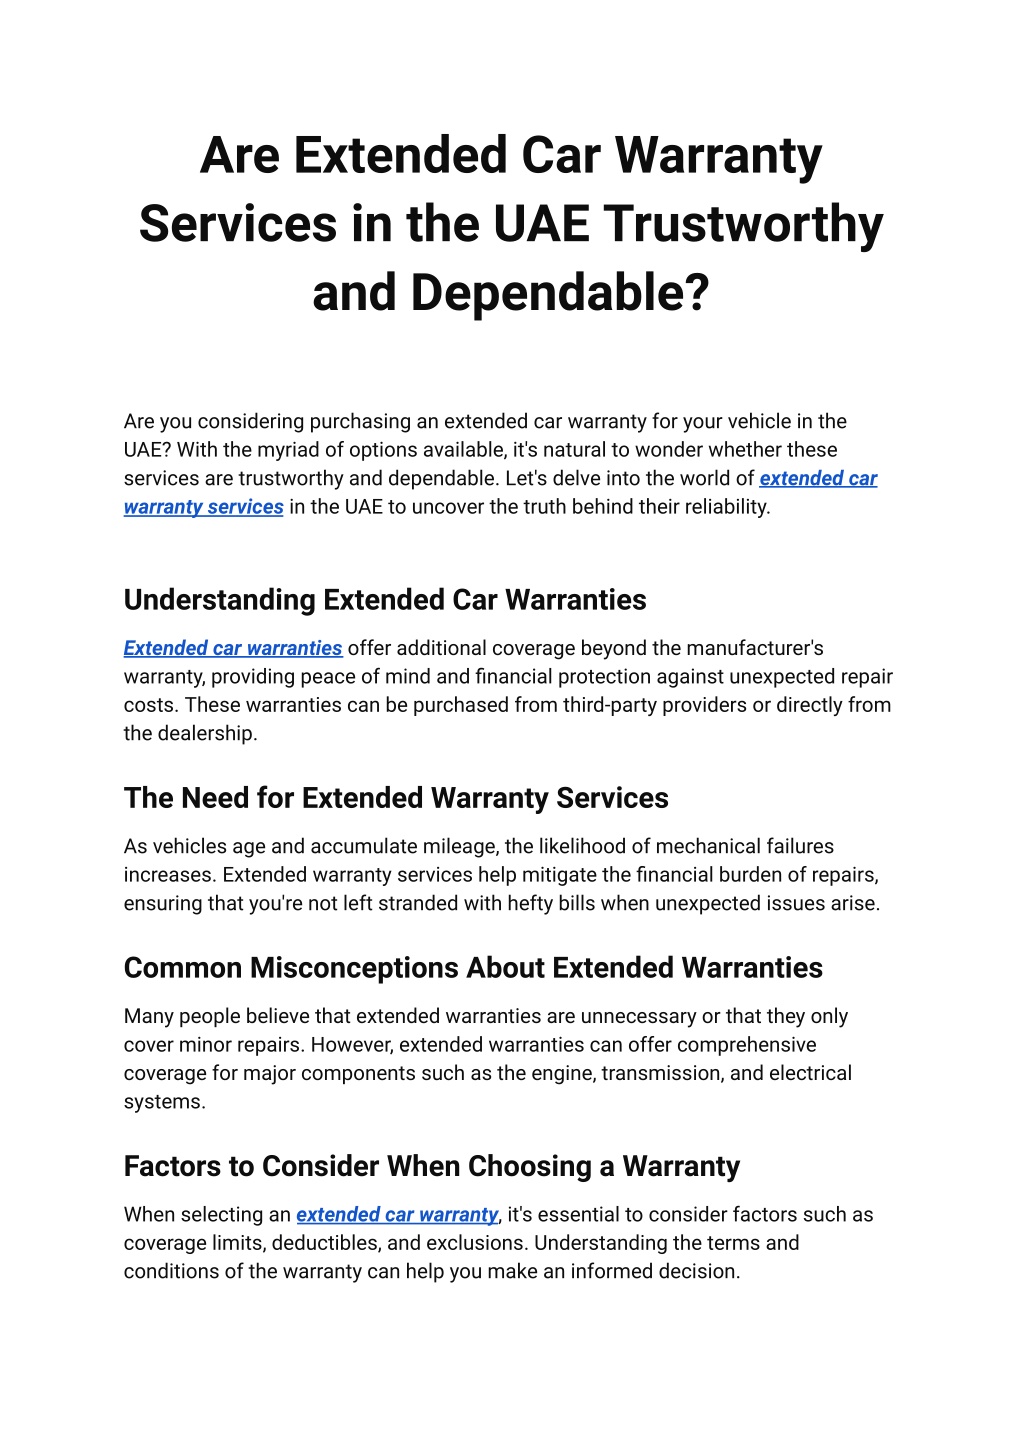 are extended car warranty services l.w